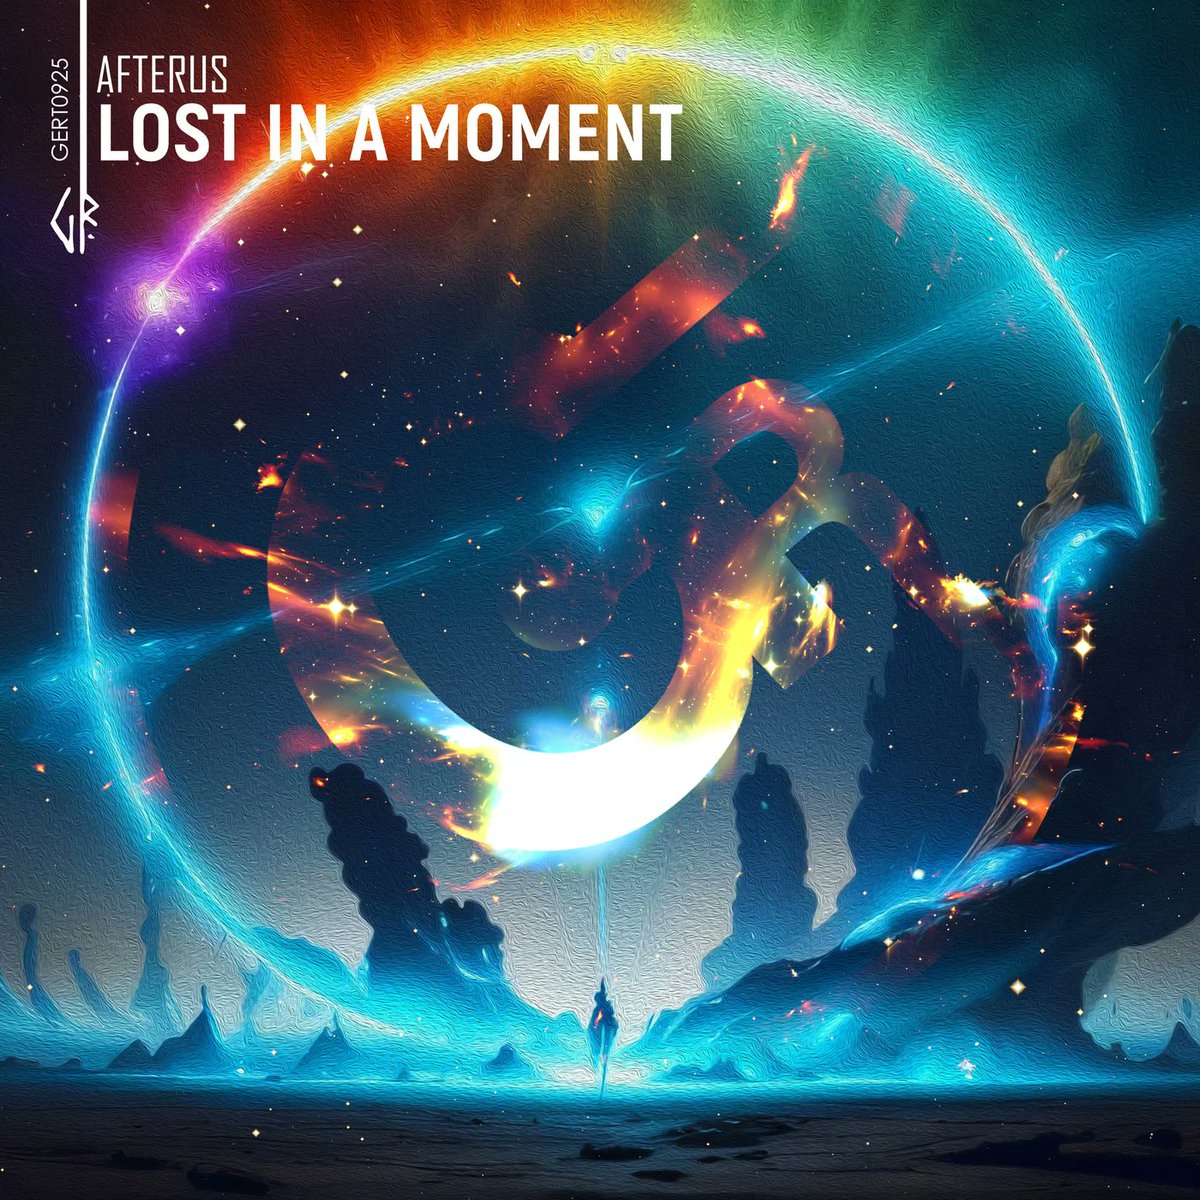 #NowPlaying #SpiritualTrance186 @PlayTranceRadio🔊playtrance.com 27. @MusicAfterus - Lost In A Moment [@GertRecords] #NewMusic #Trance #TranceFamily